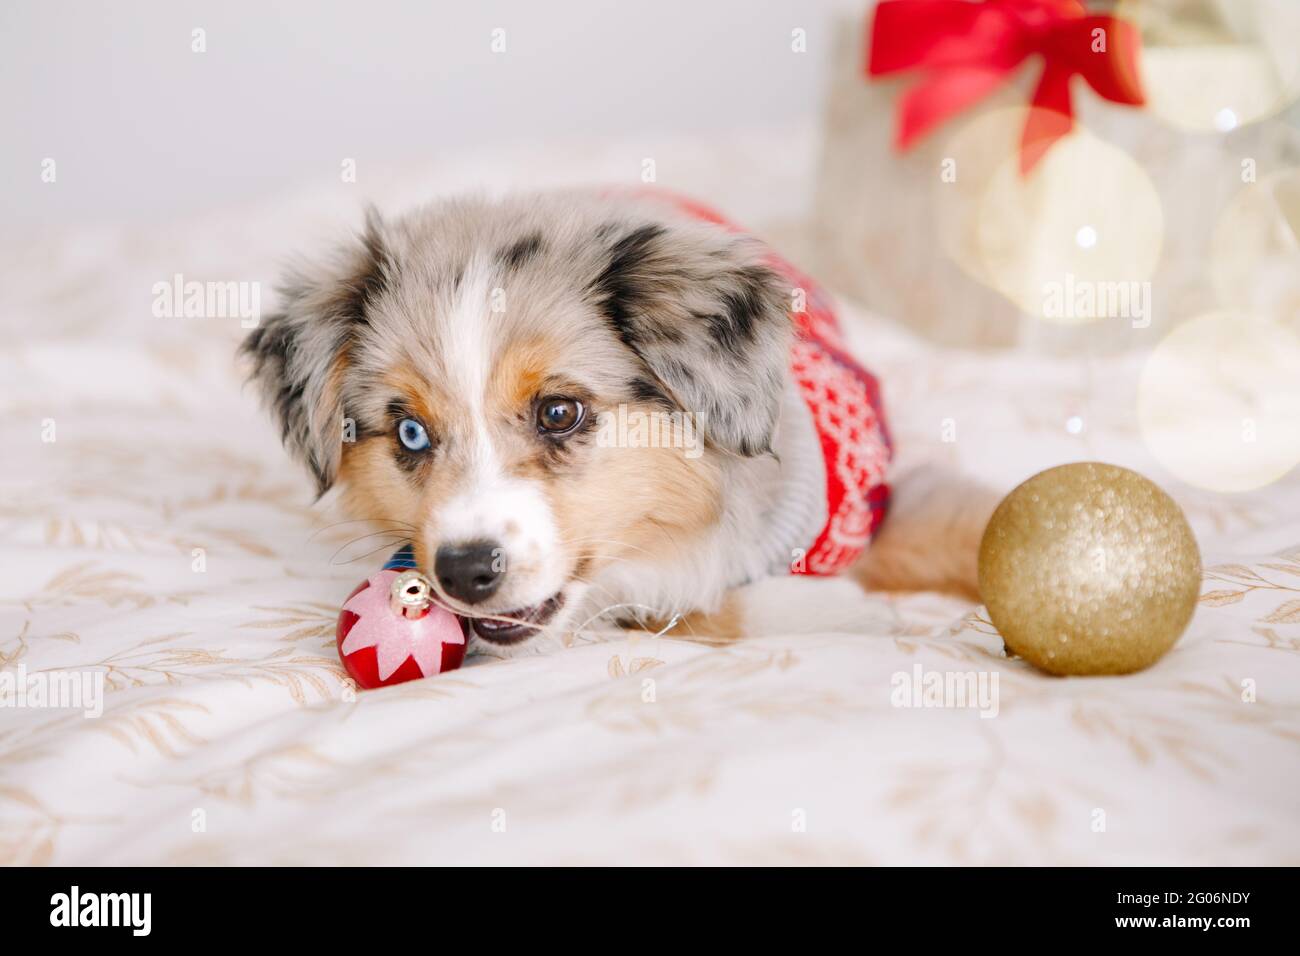 Cute small dog pet lying on bed at home with winter holiday ornaments baubles. Christmas New Year holiday celebration. Adorable miniature Australian s Stock Photo